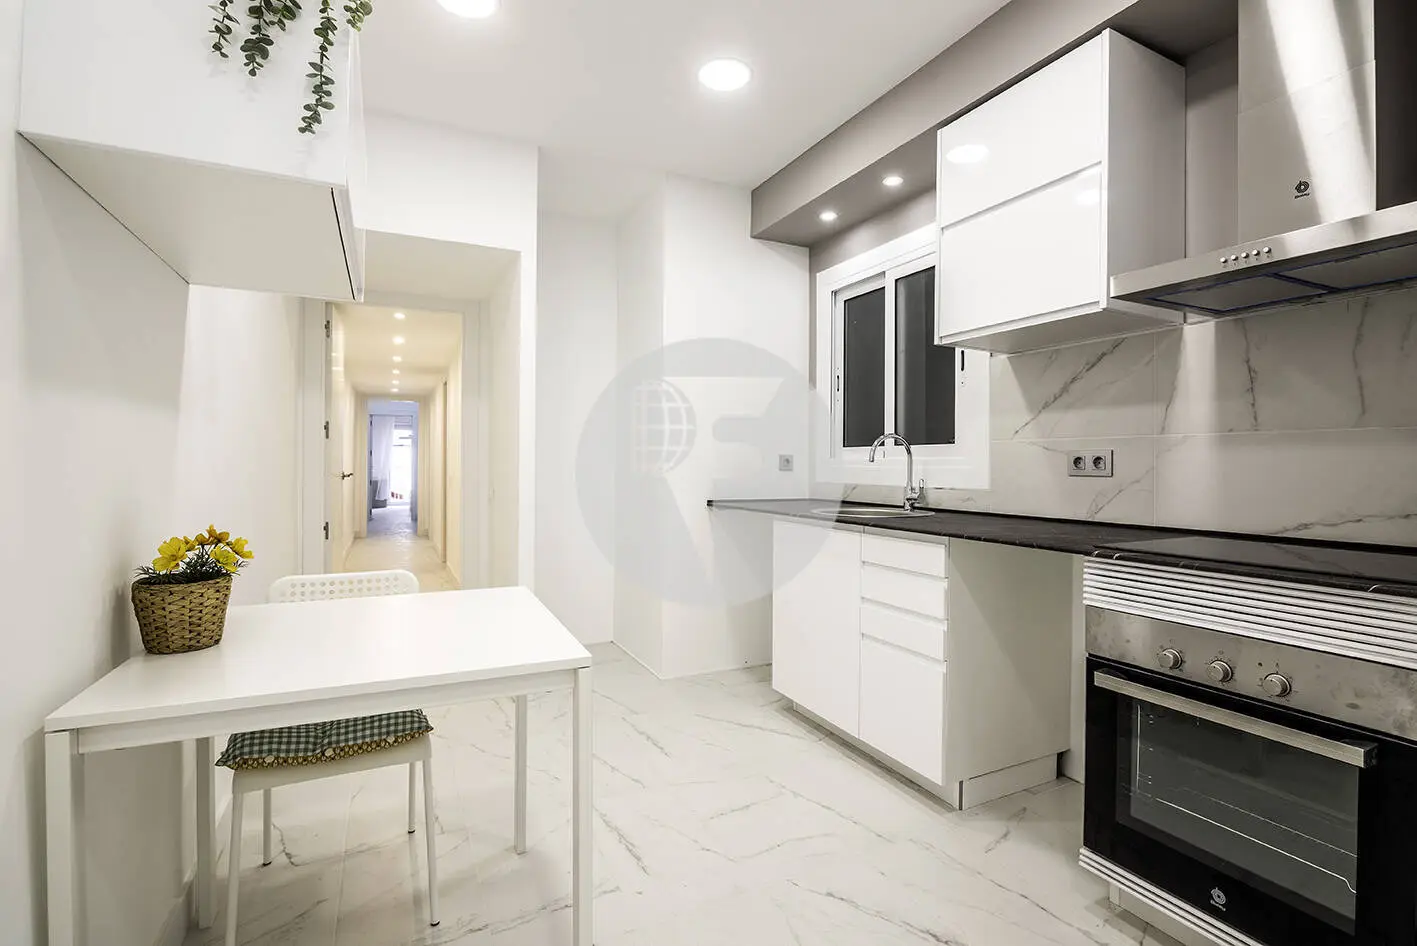 Brand new completely renovated apartment on Aragó street in the heart of El Clot in Barcelona. 14